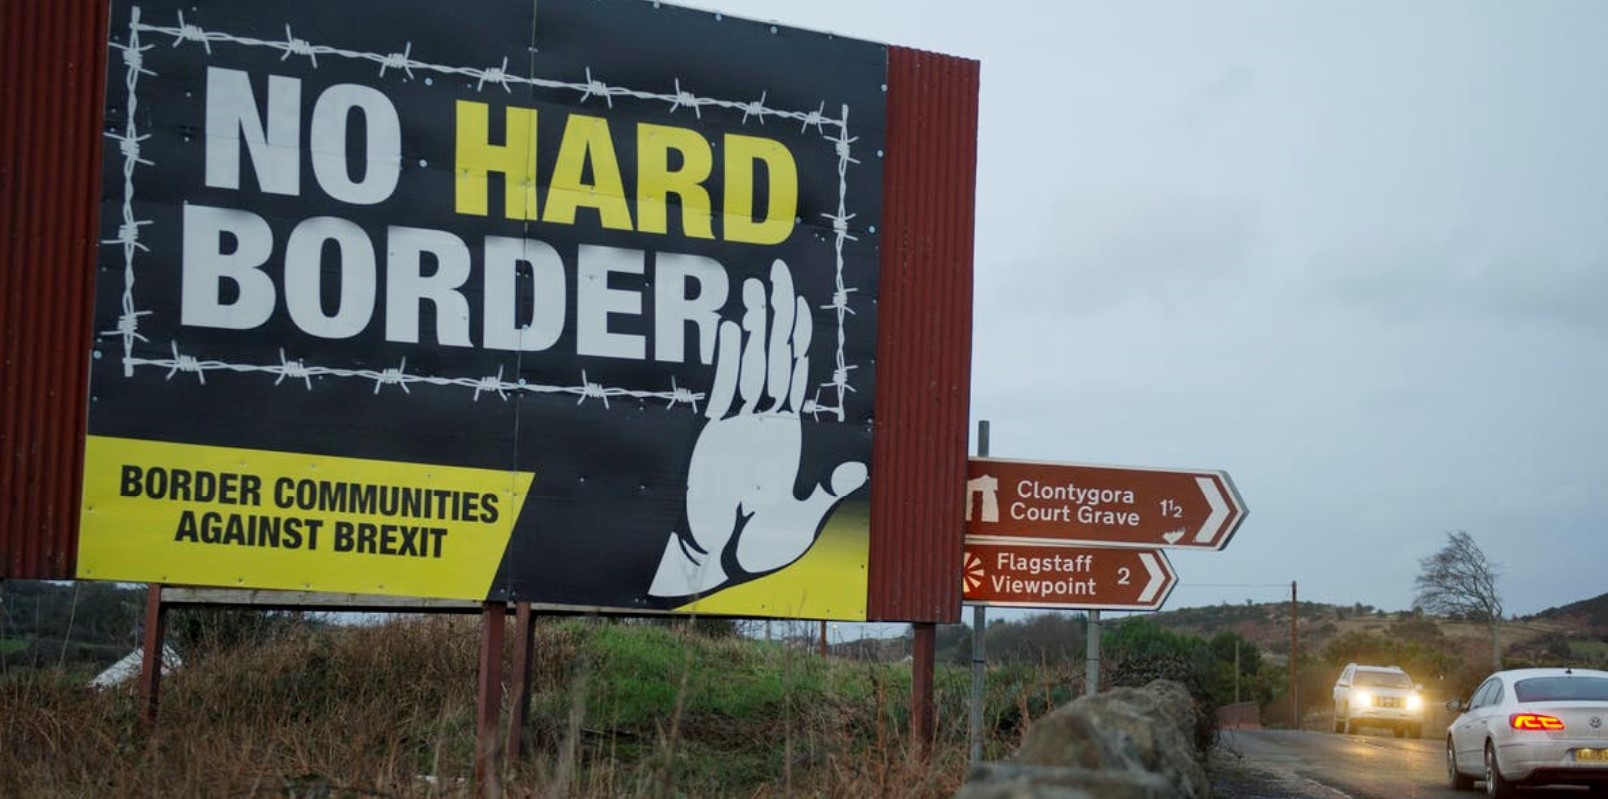 Anti-Brexit Northern Ireland road sign with wording 'no hard border' inside barbed wire